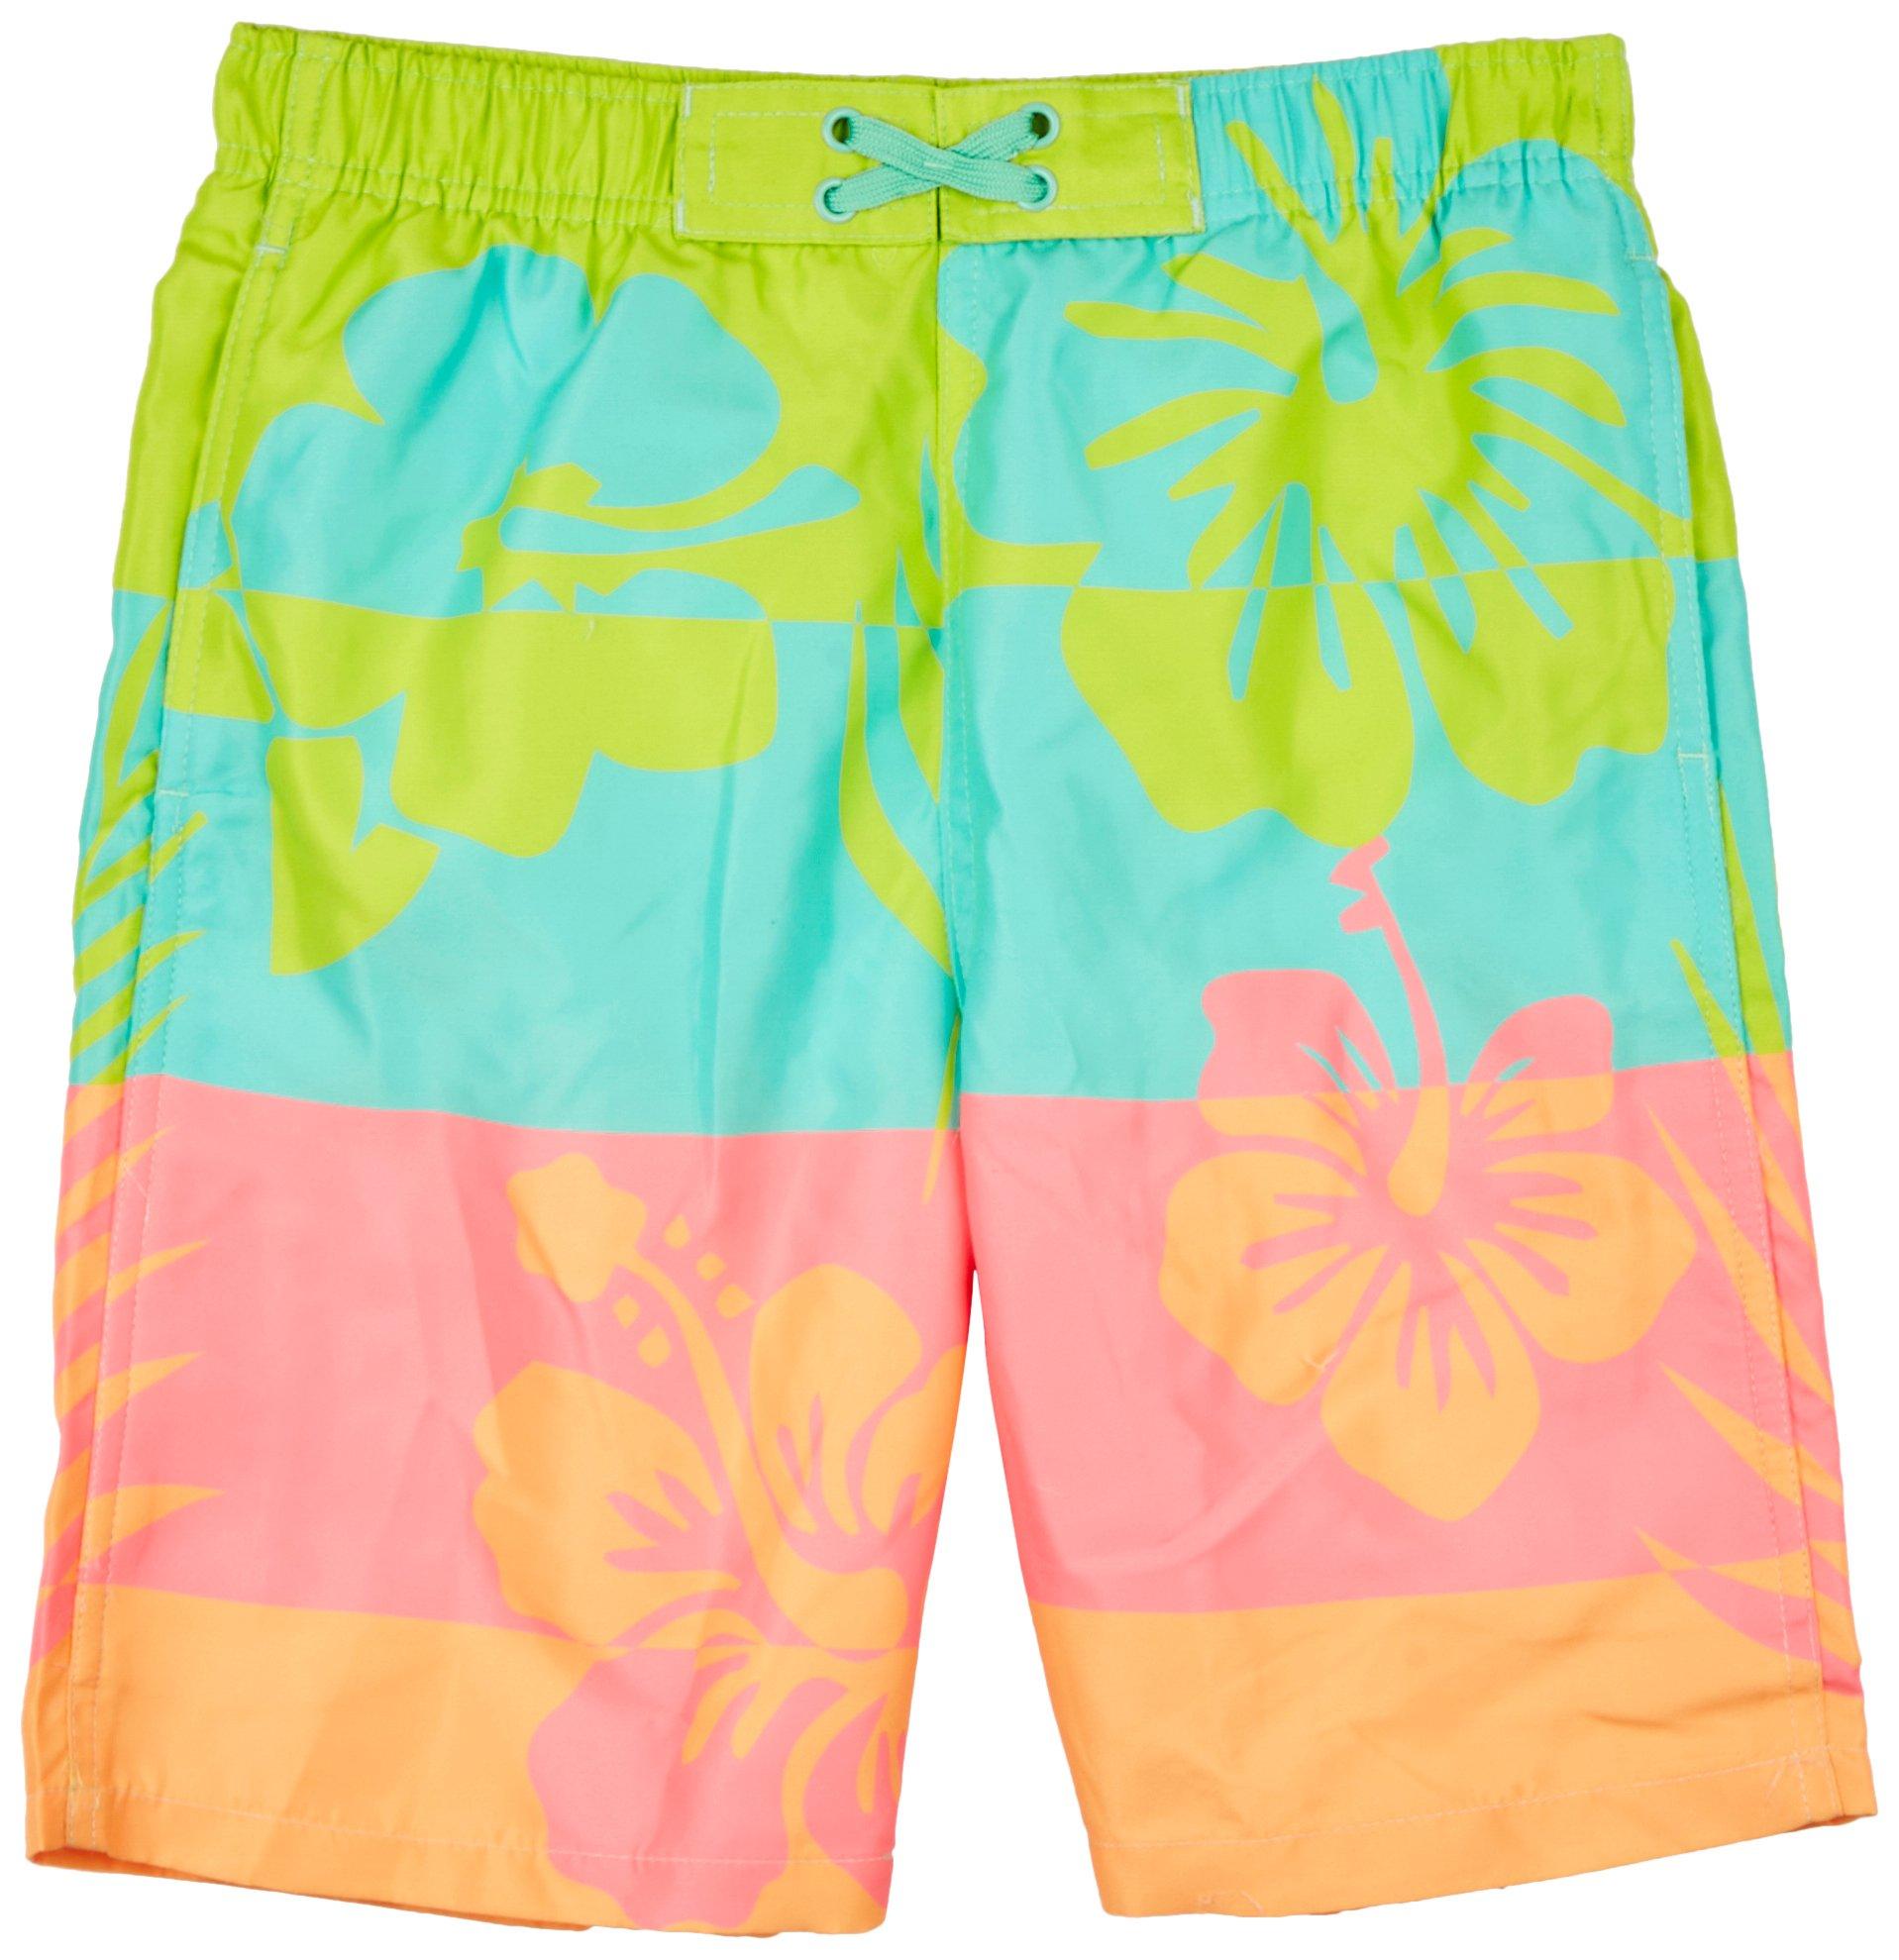 Big Boys Bright Hibiscus 2-in1 Swimsuit Shorts